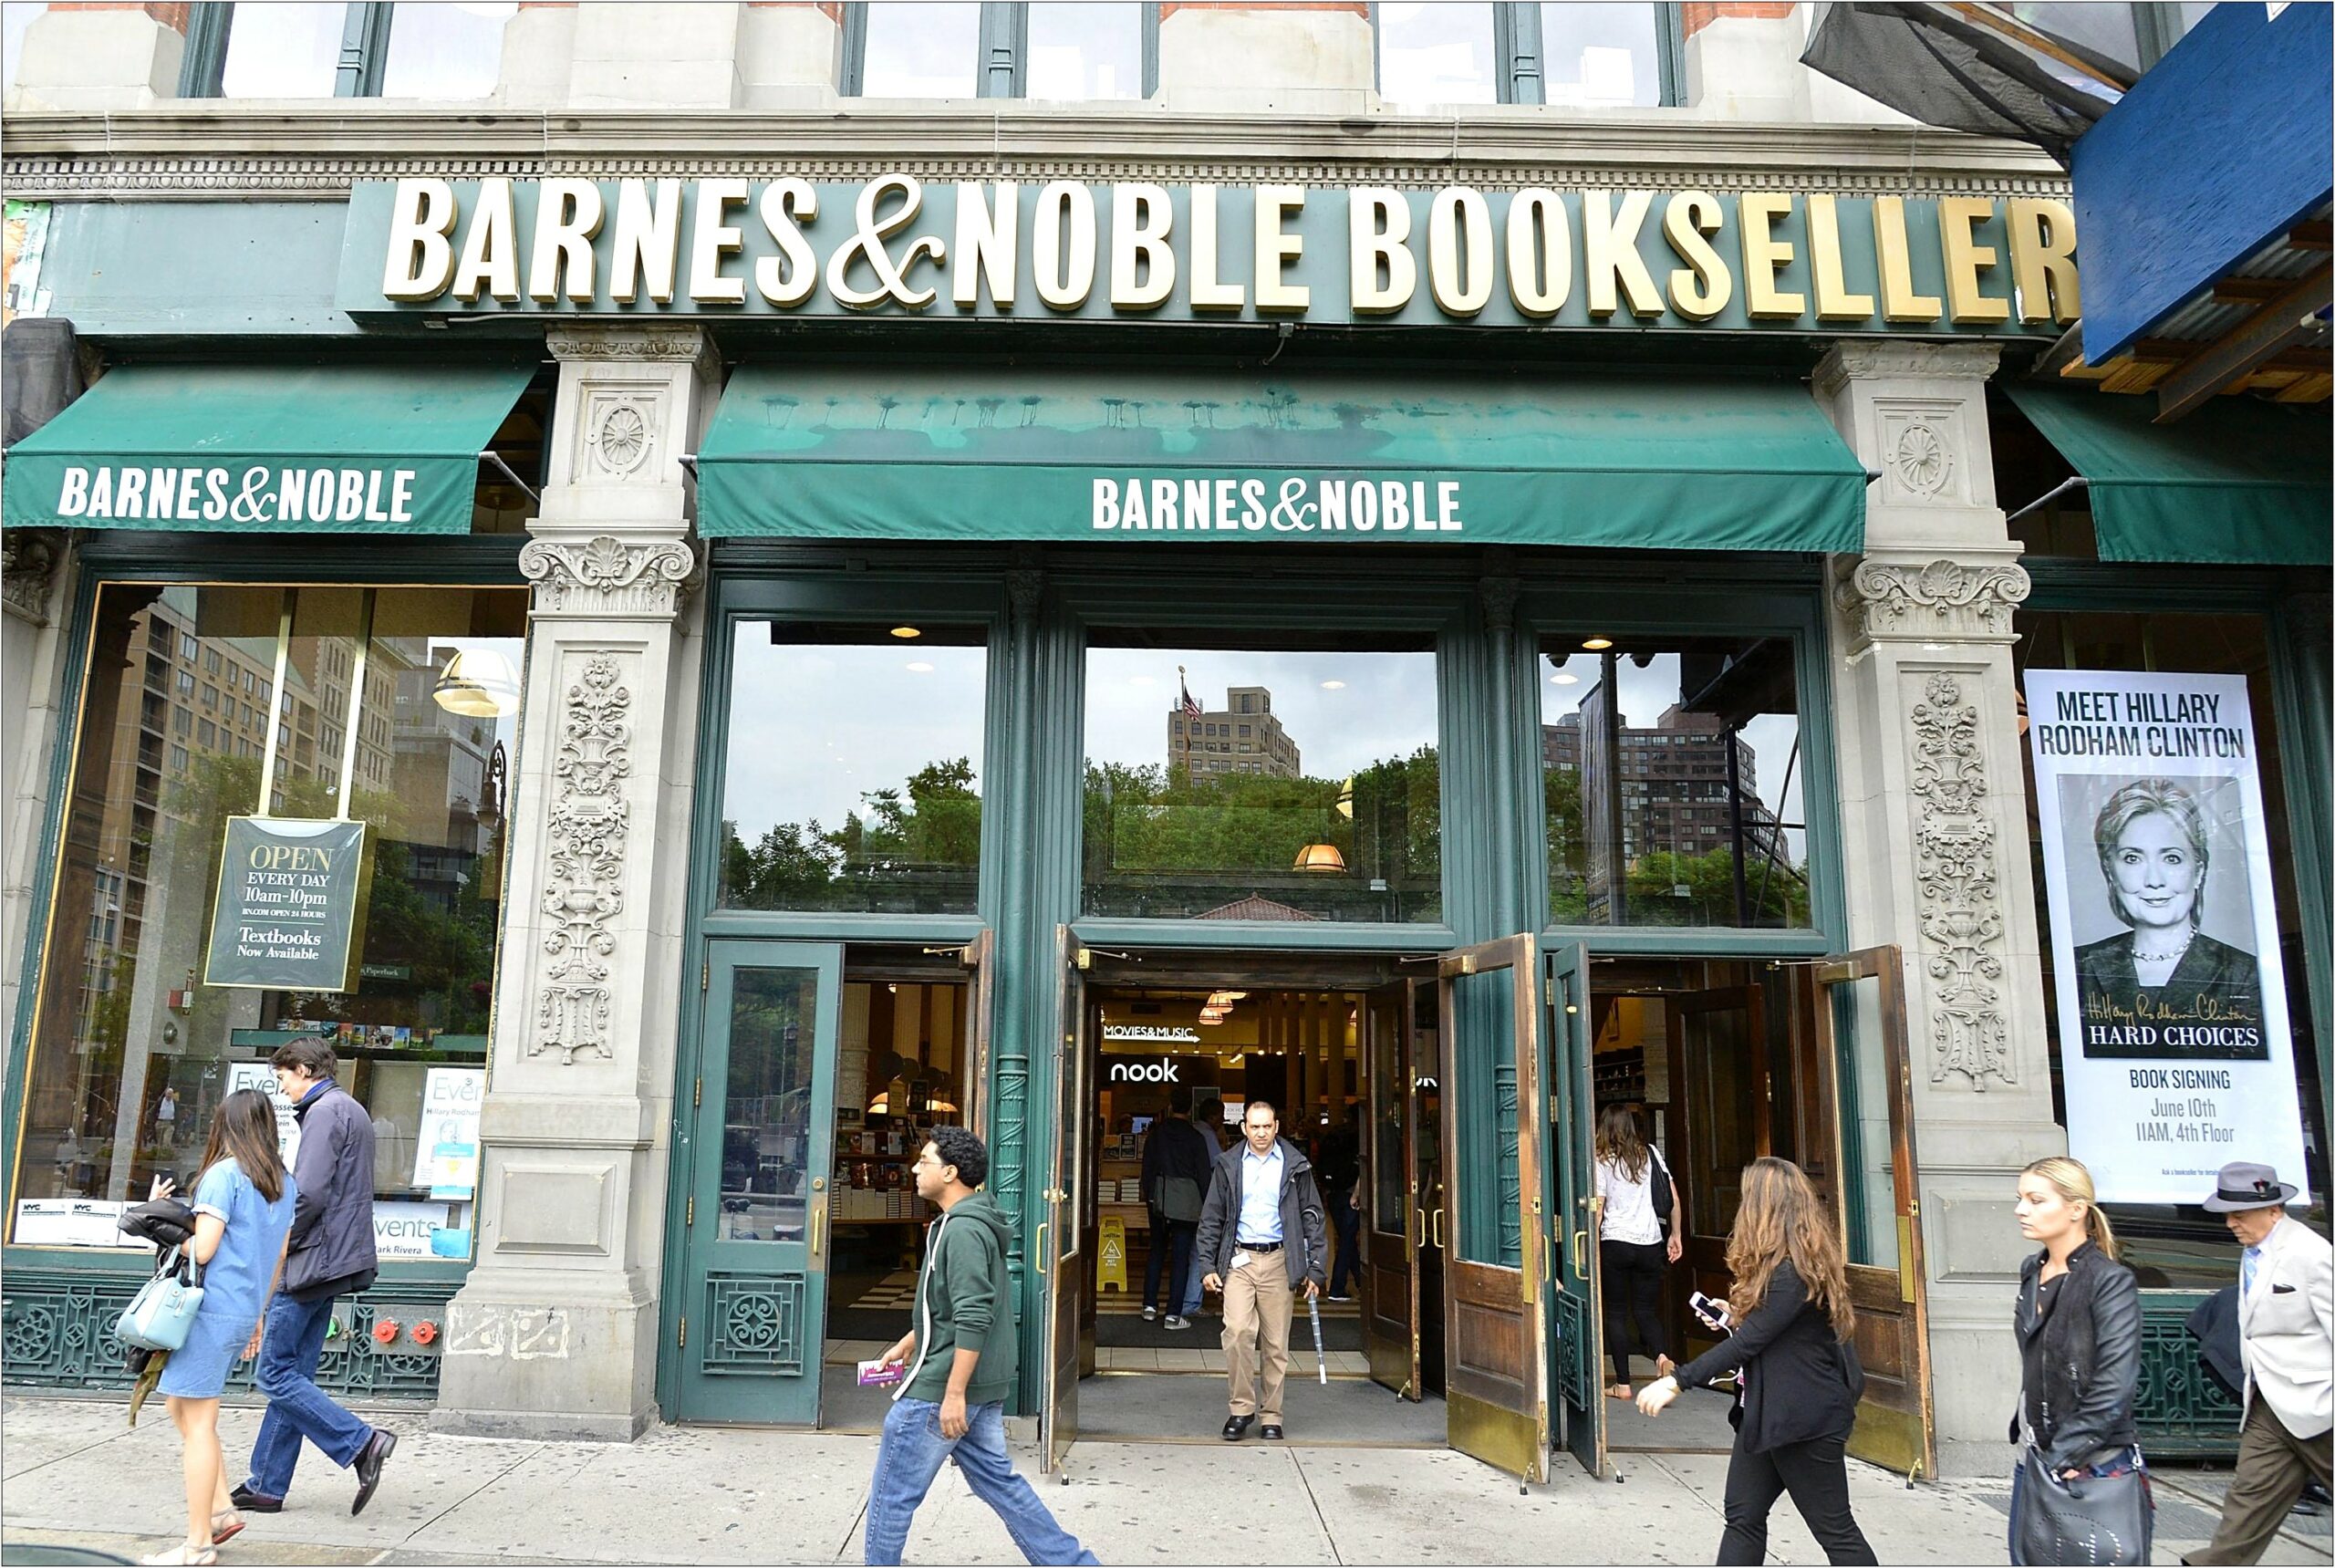 Resume Objective For Barnes And Noble